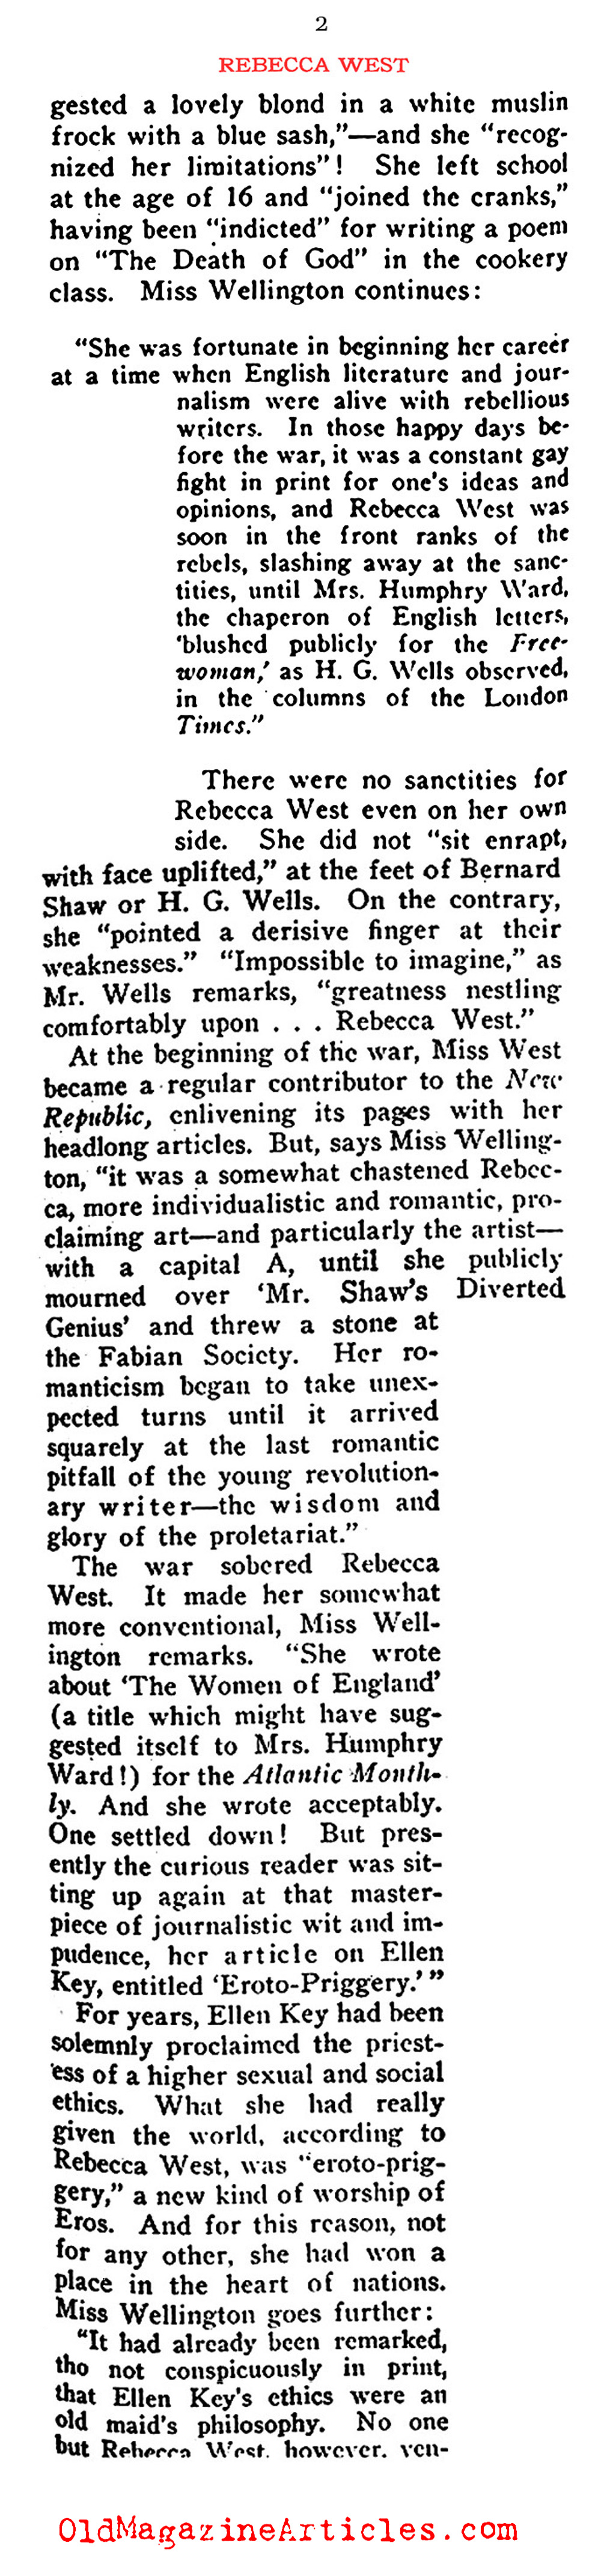 Rebecca West: <i>The Last Birth of Time</i> (Current Opinion, 1921)